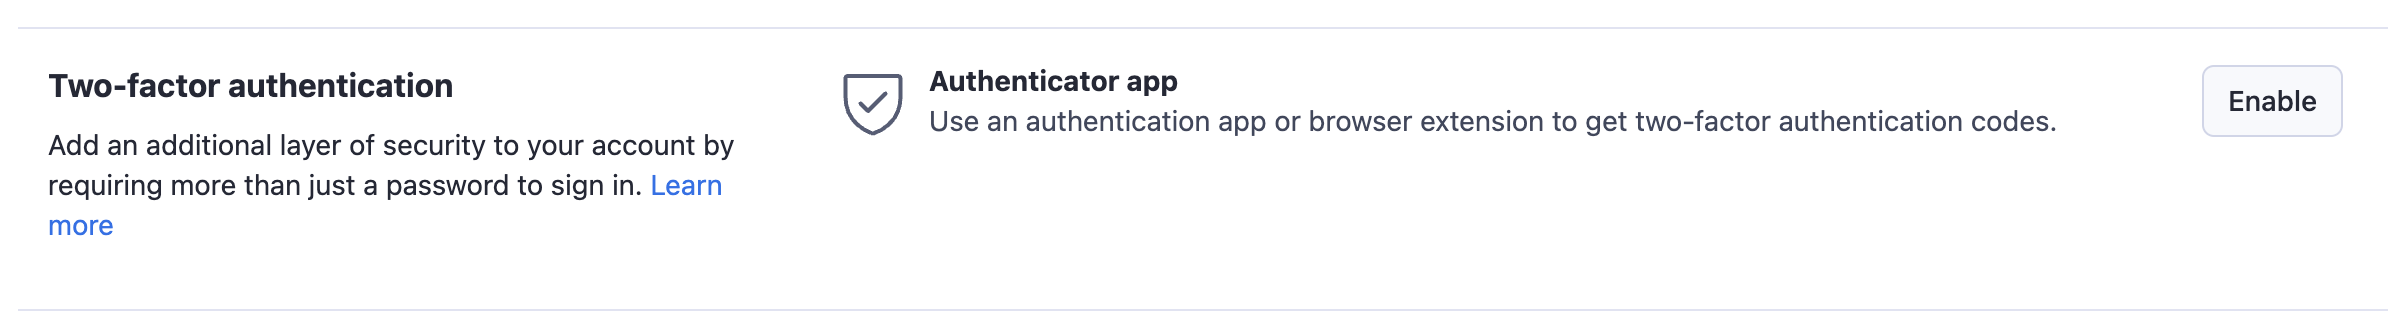 Apify Console two-factor authentication section